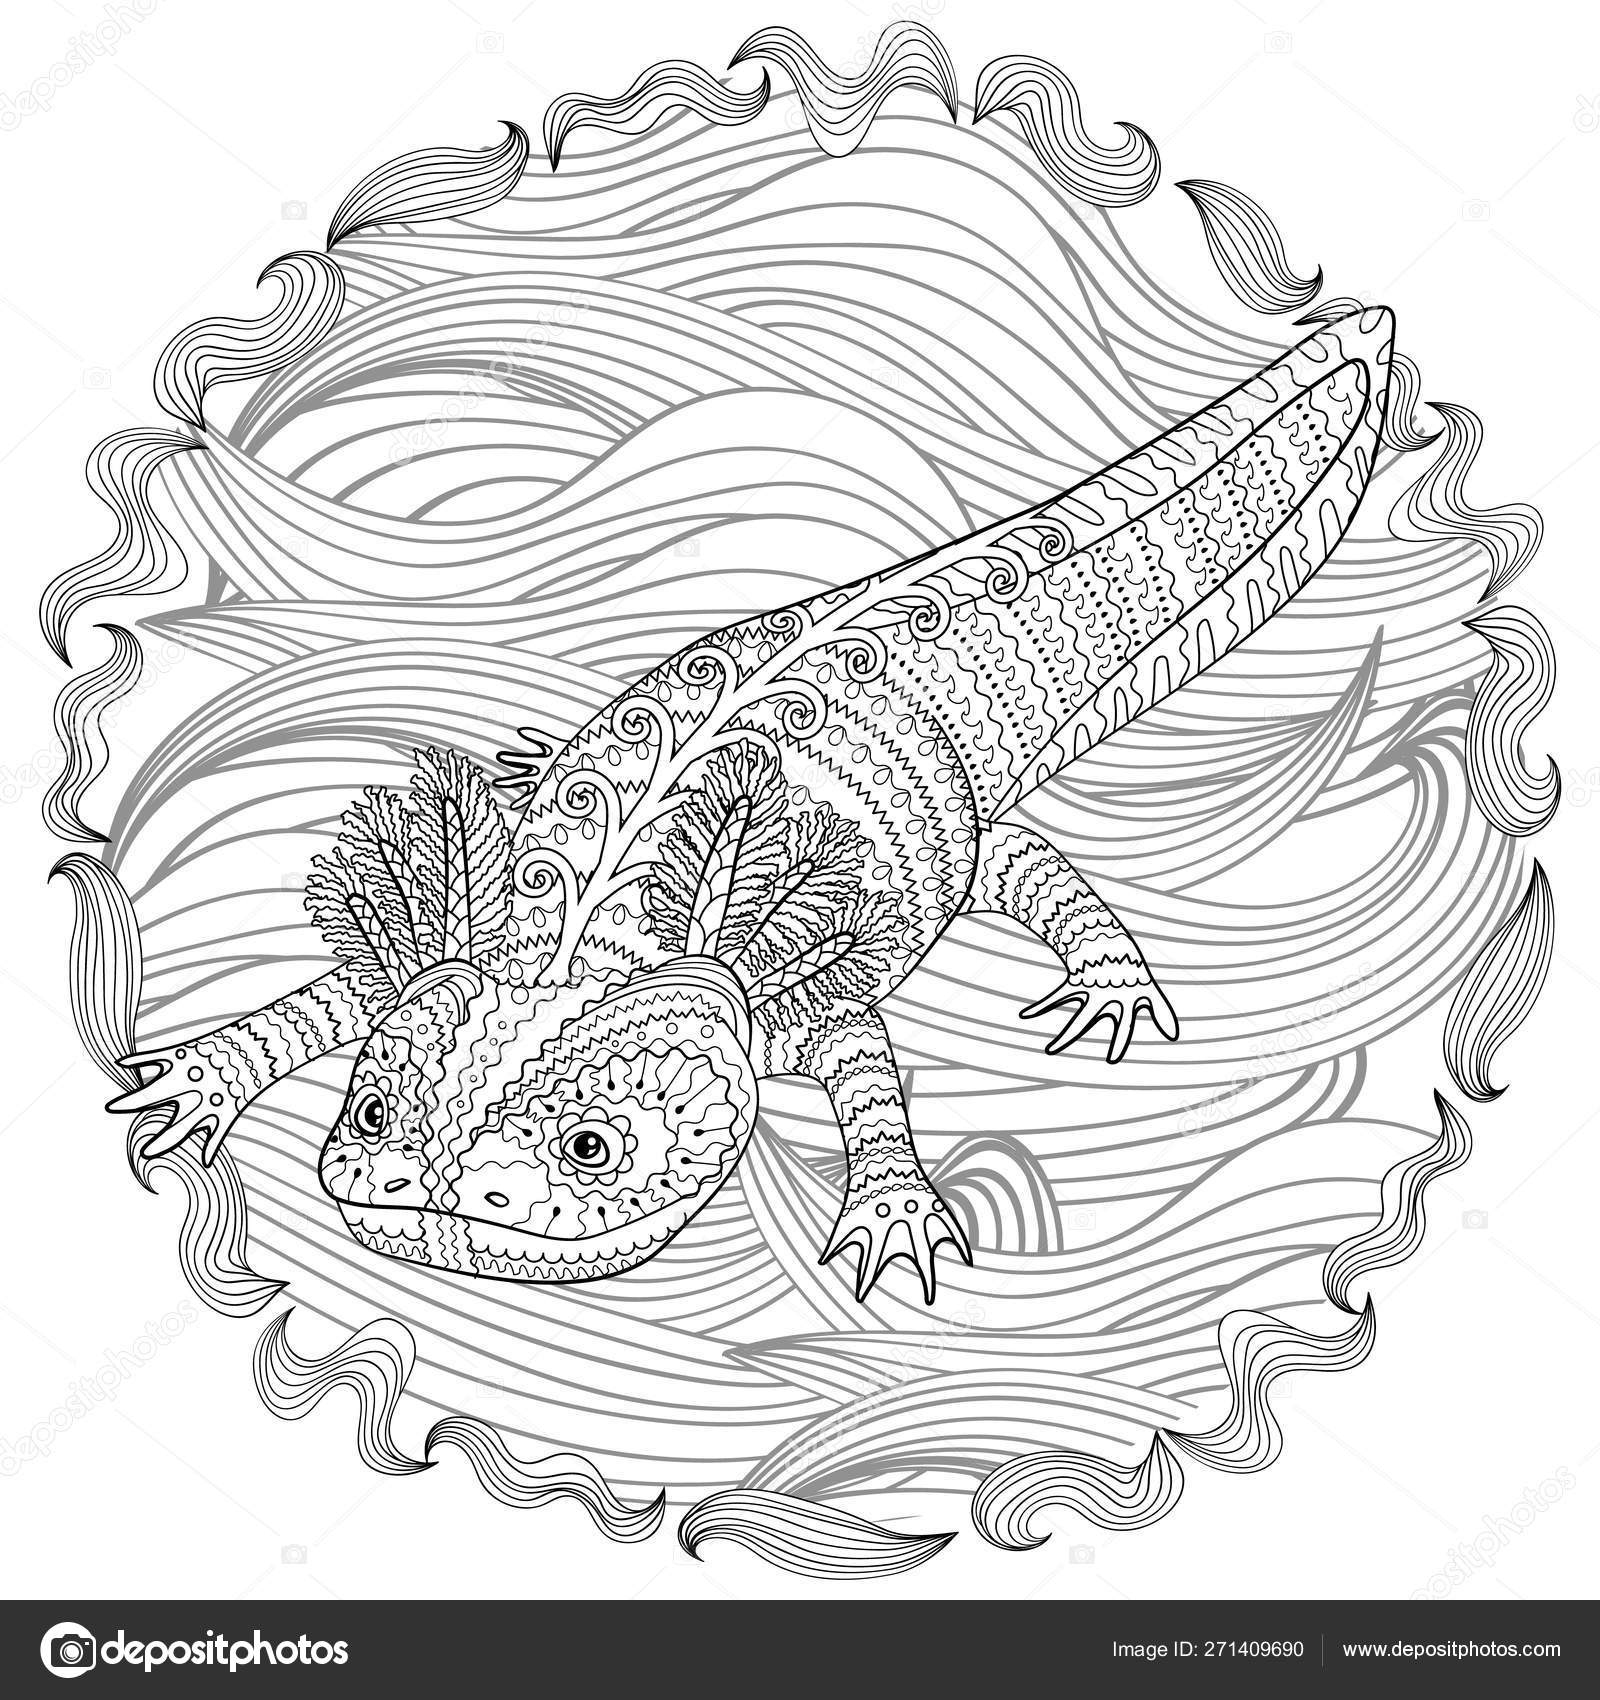 Download Axolotl Coloring Page Pictures